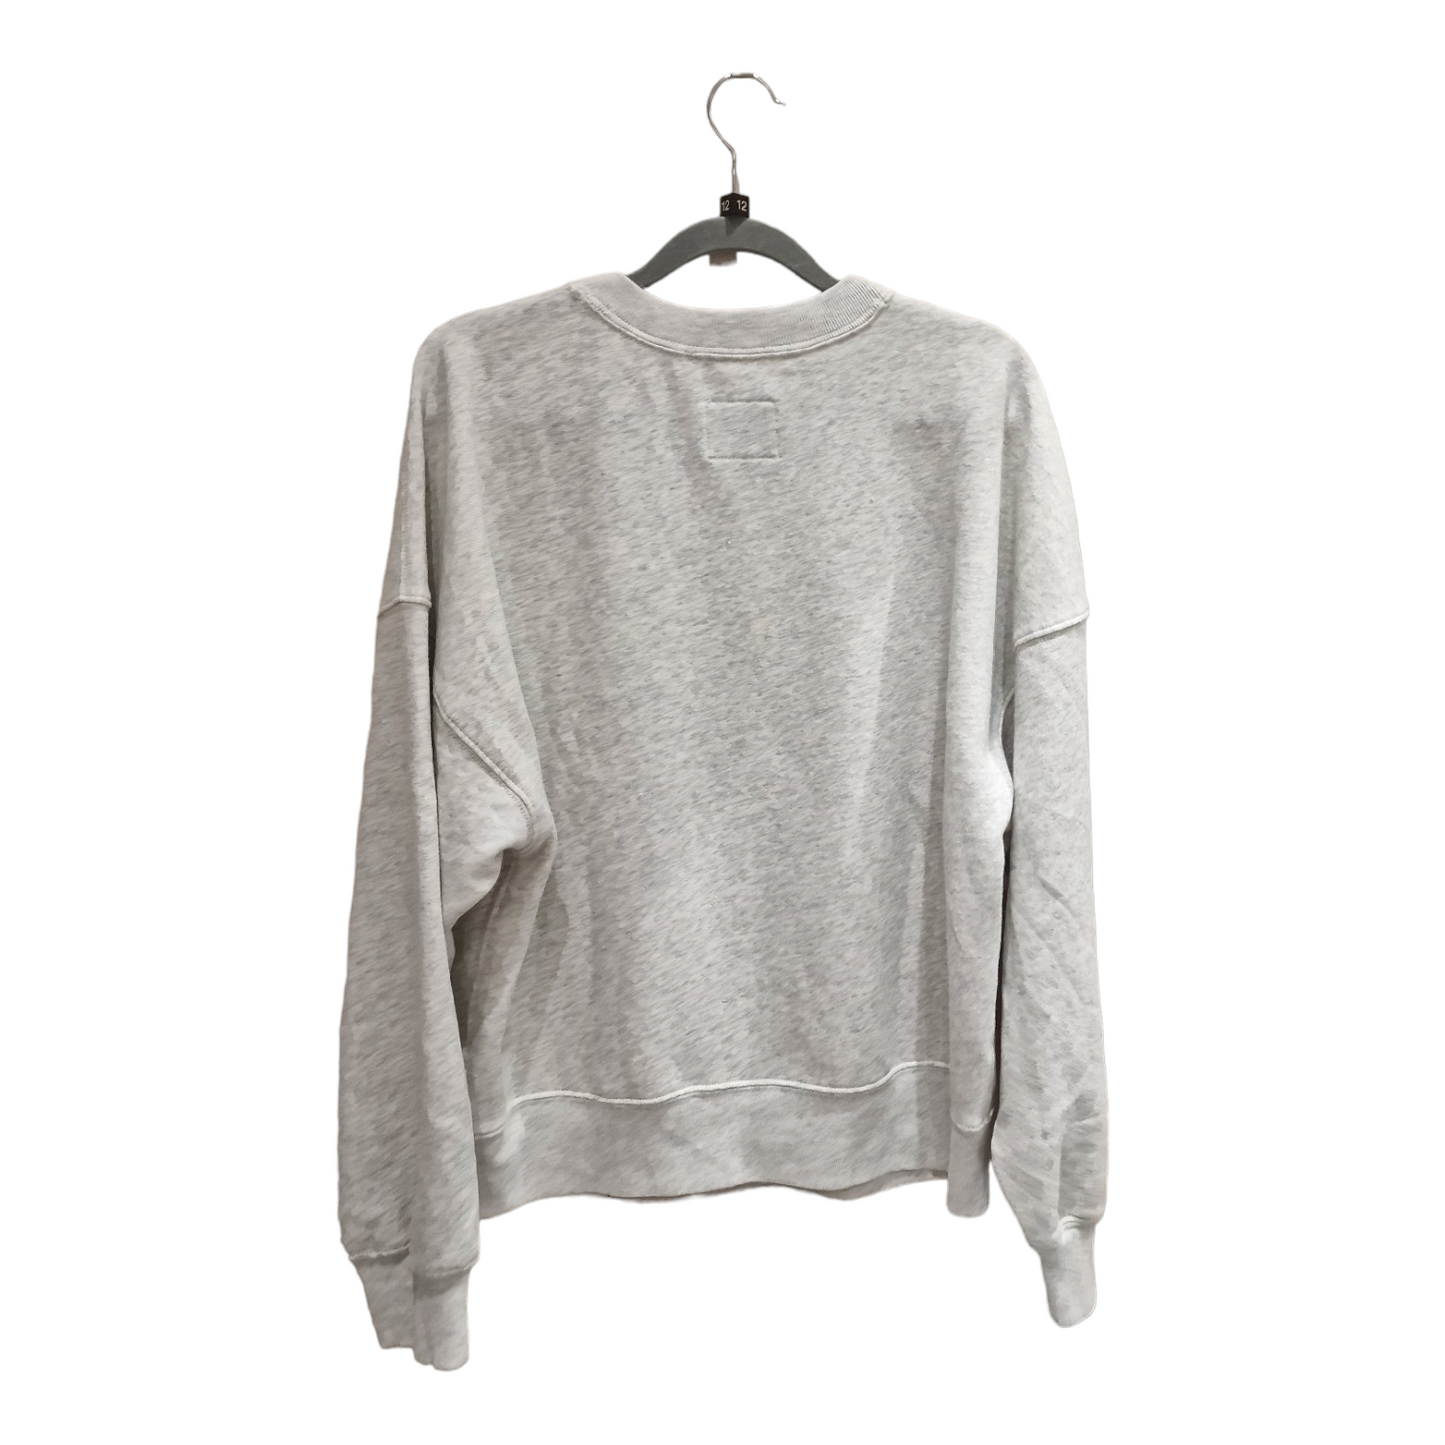 Abercrombie and Fitch grey sweatshirt,  size M